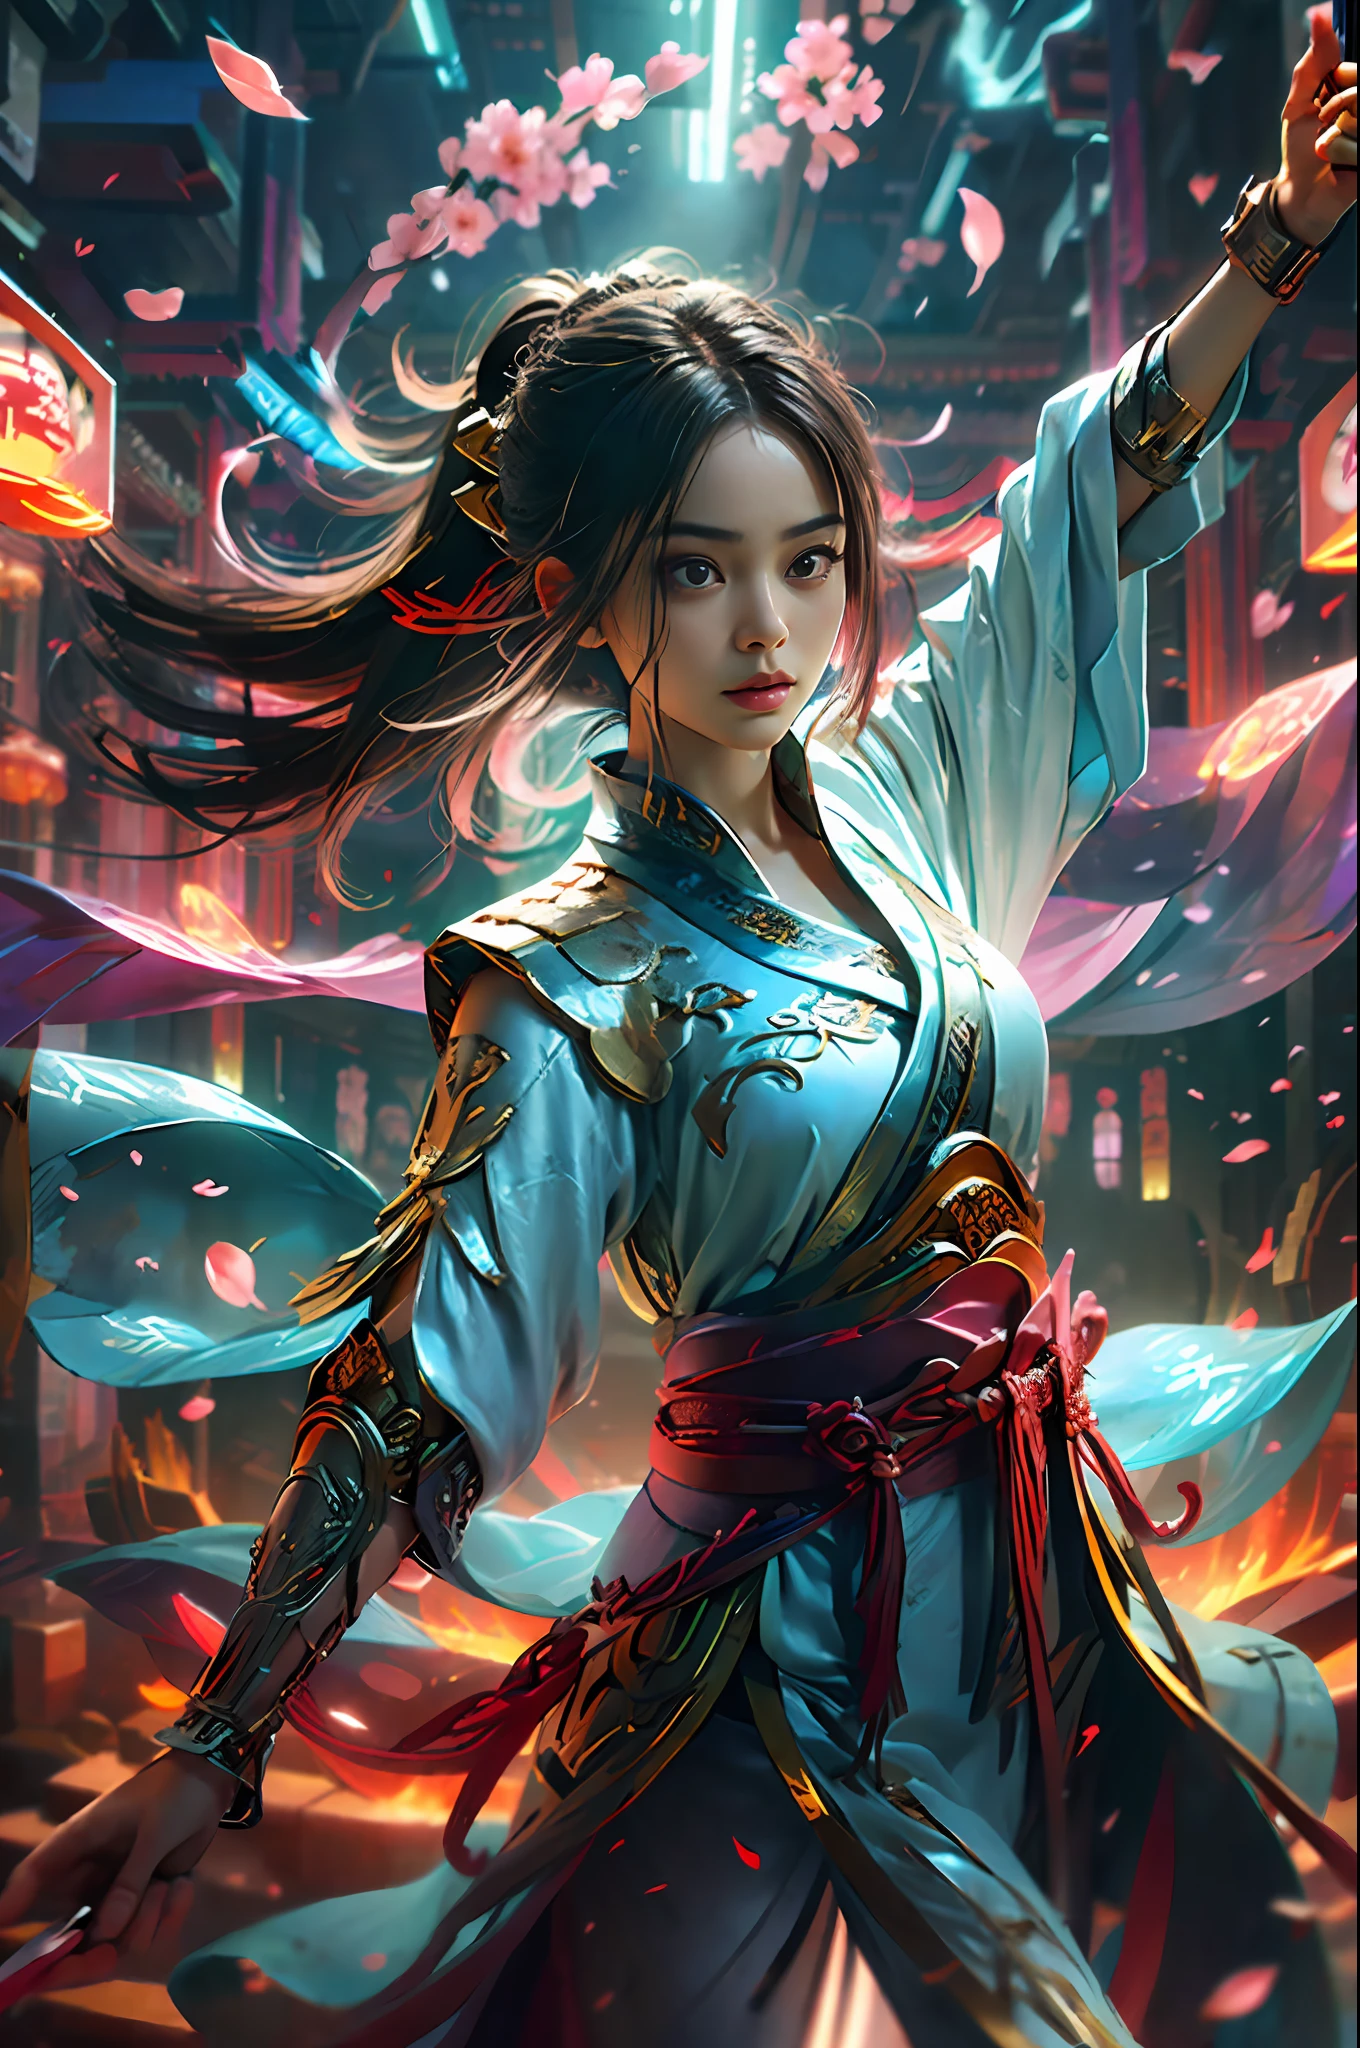 Dramatic sky, blue lightning Style: masterpiece, best quality, 8k, sharp focus, realistic, (detailed)), (around the flame, around the halo) ((dynamic pose)), ((good highlights), (perfect proportions), (dynamic), (complex), (complementary colors), good perspective, 1 young Chinese girl with a short sword in her hand, dancing forward and floating out petals,